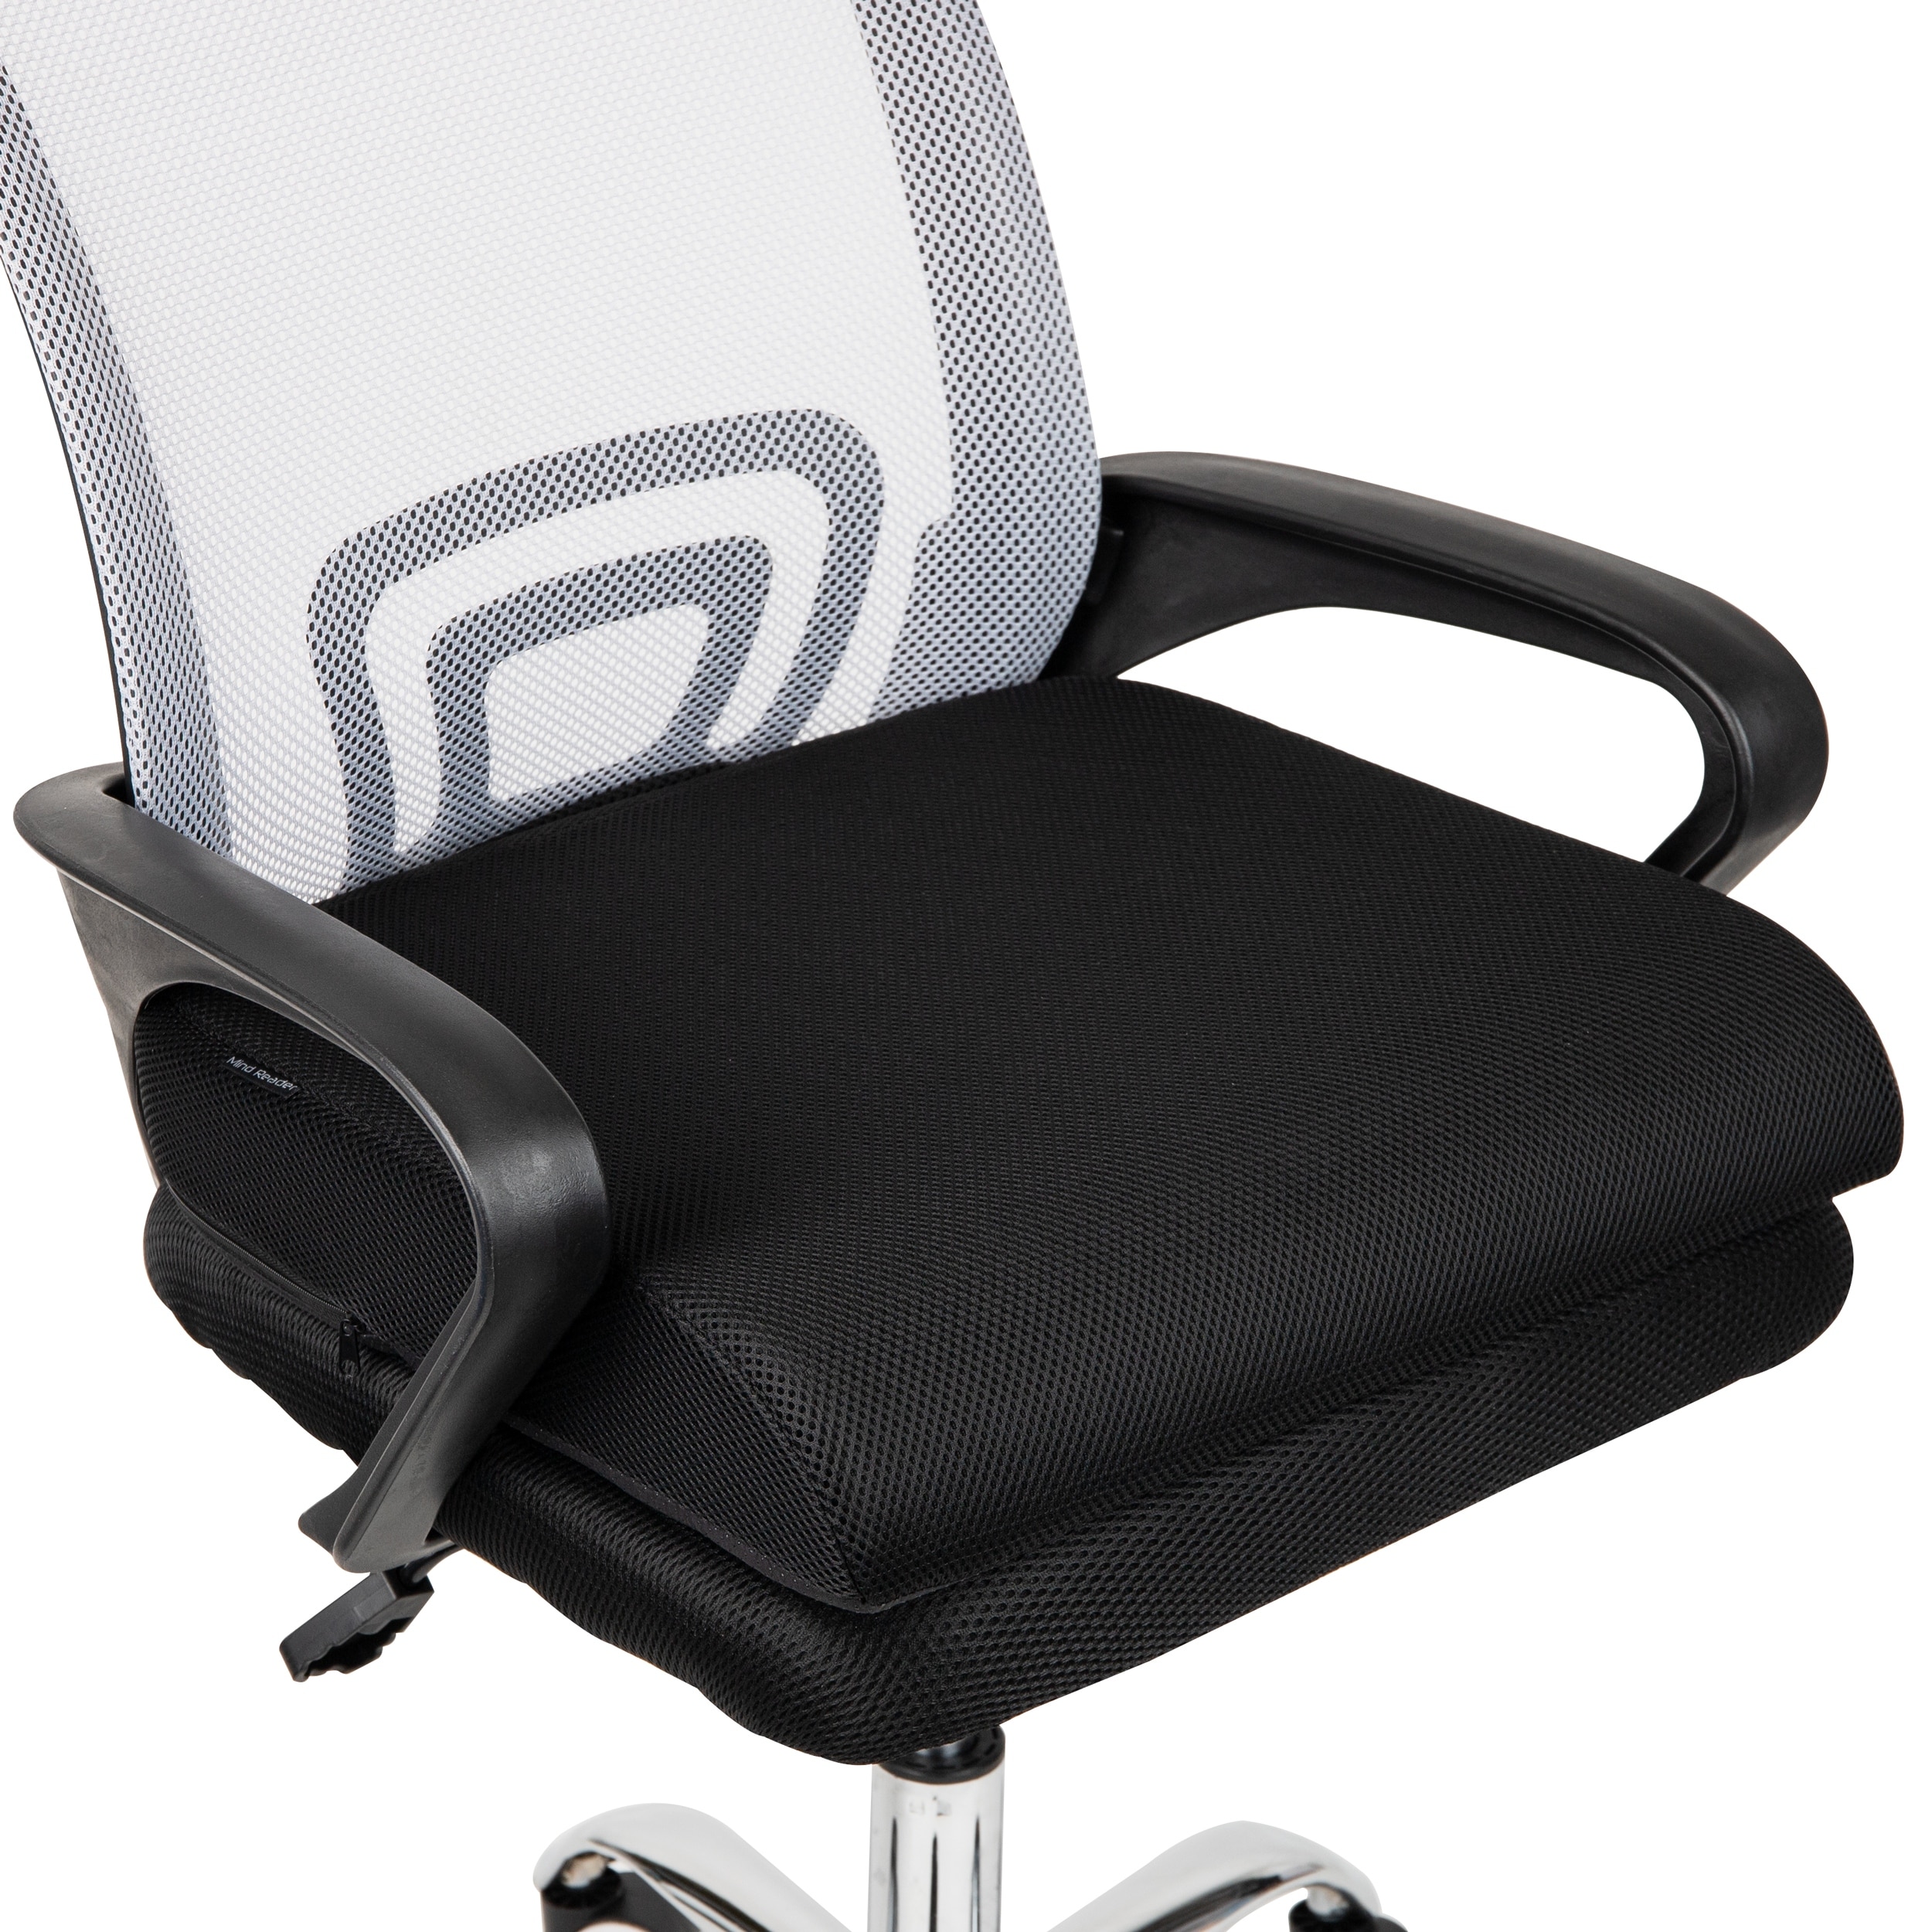 https://ak1.ostkcdn.com/images/products/is/images/direct/c7341ae855c0aeecf74d3b3254e6848bf8c95275/Mind-Reader-Harmony-Collection%2C-Ergonomic-Seat-Cushion%2C-Removable%2C-Washable-Cover%2C-Lower-Back-and-Sciatica-Relief%2C-Black.jpg